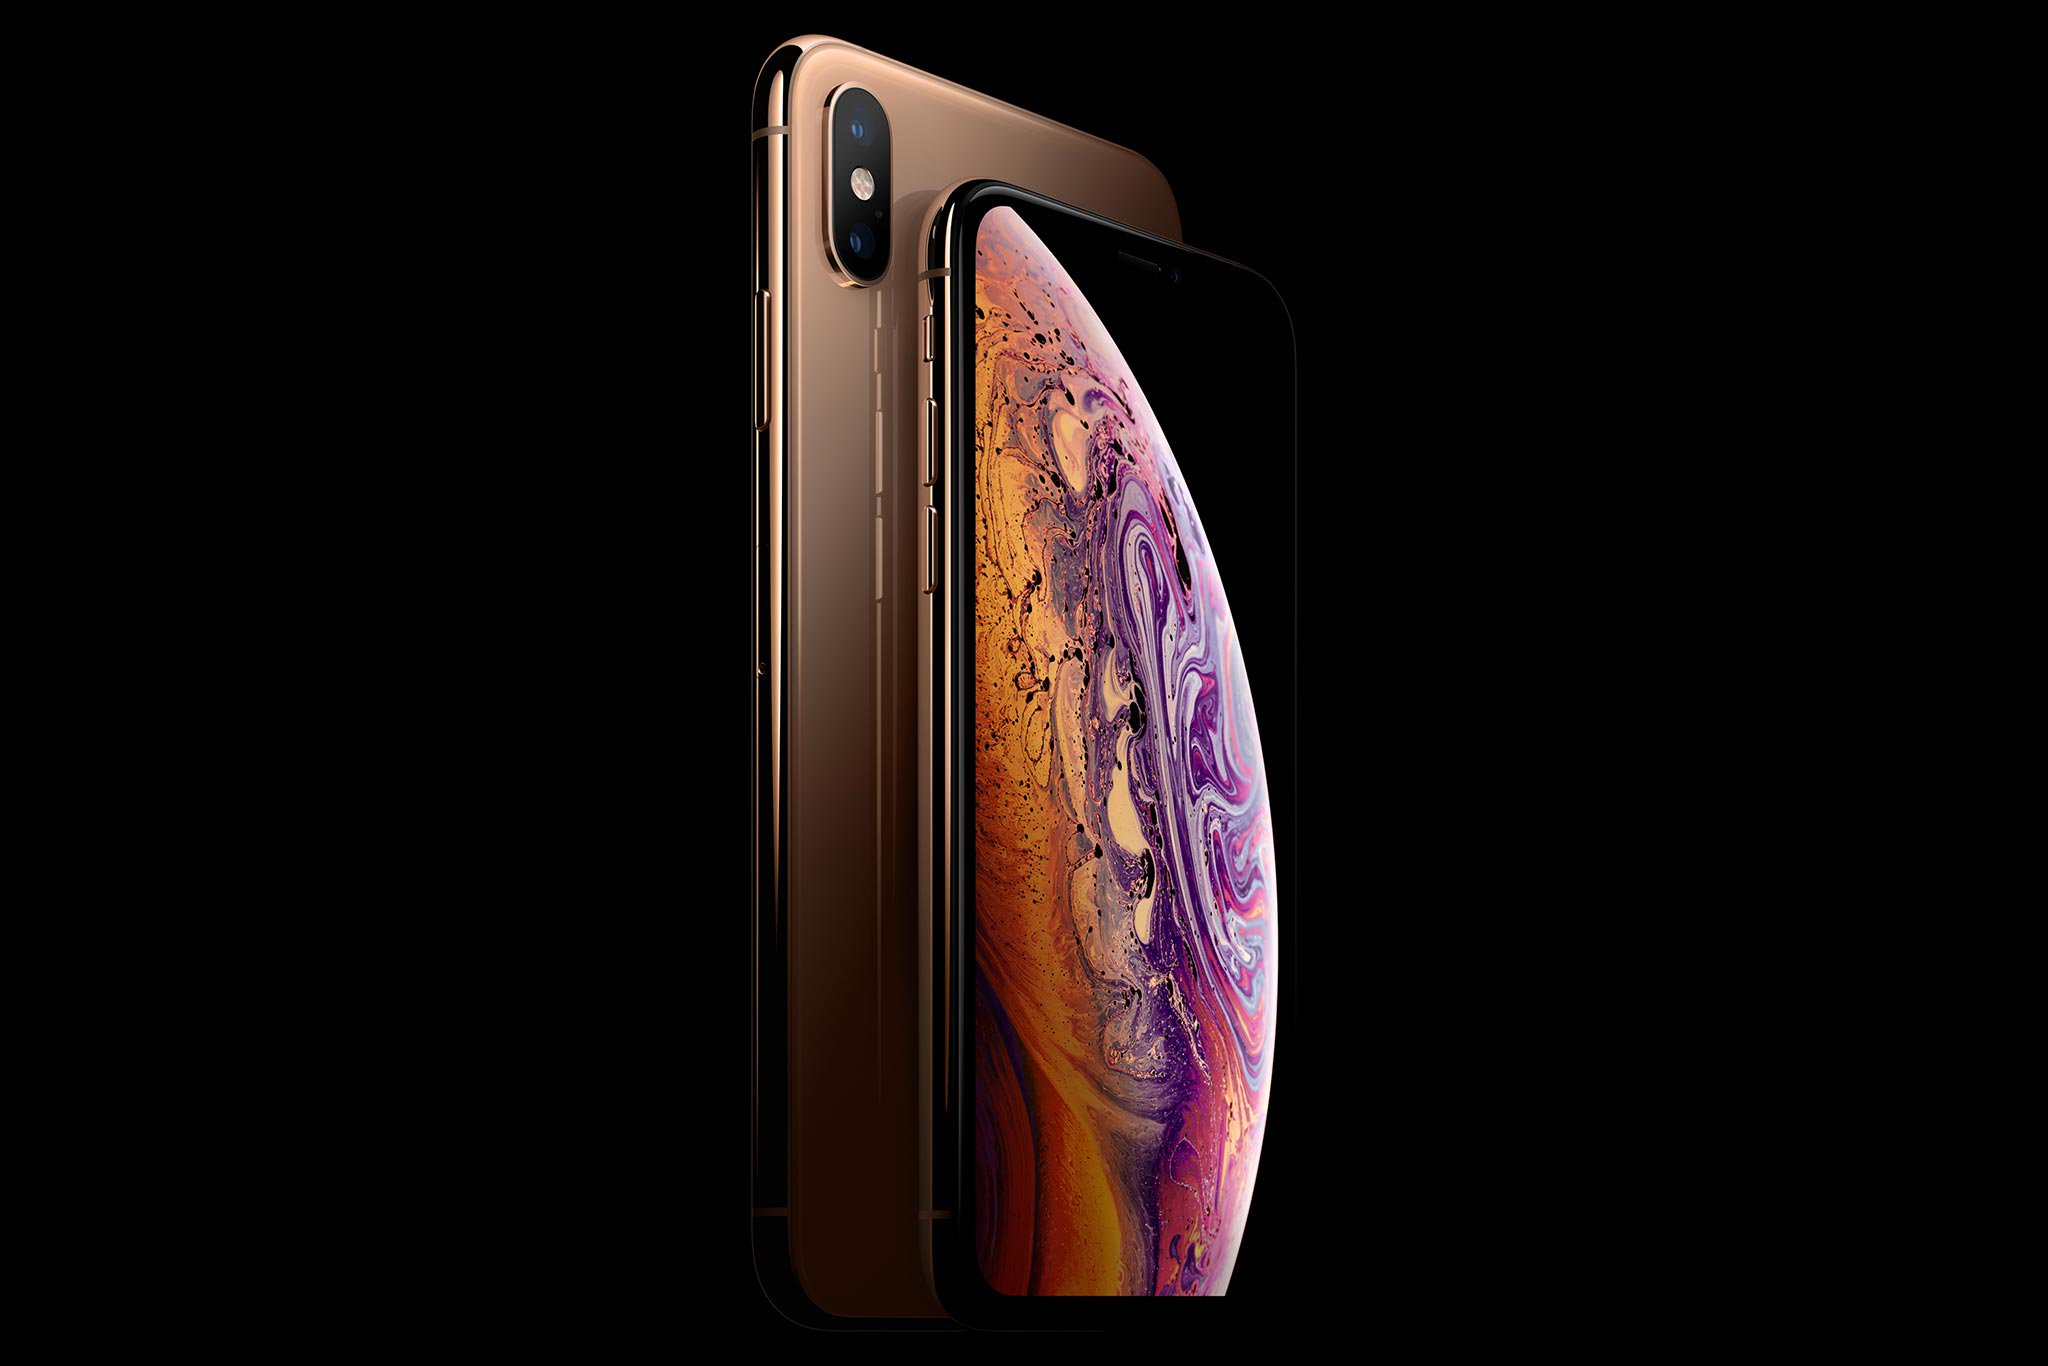 iPhone XS, iPhone XS Max launched, available on 21th September